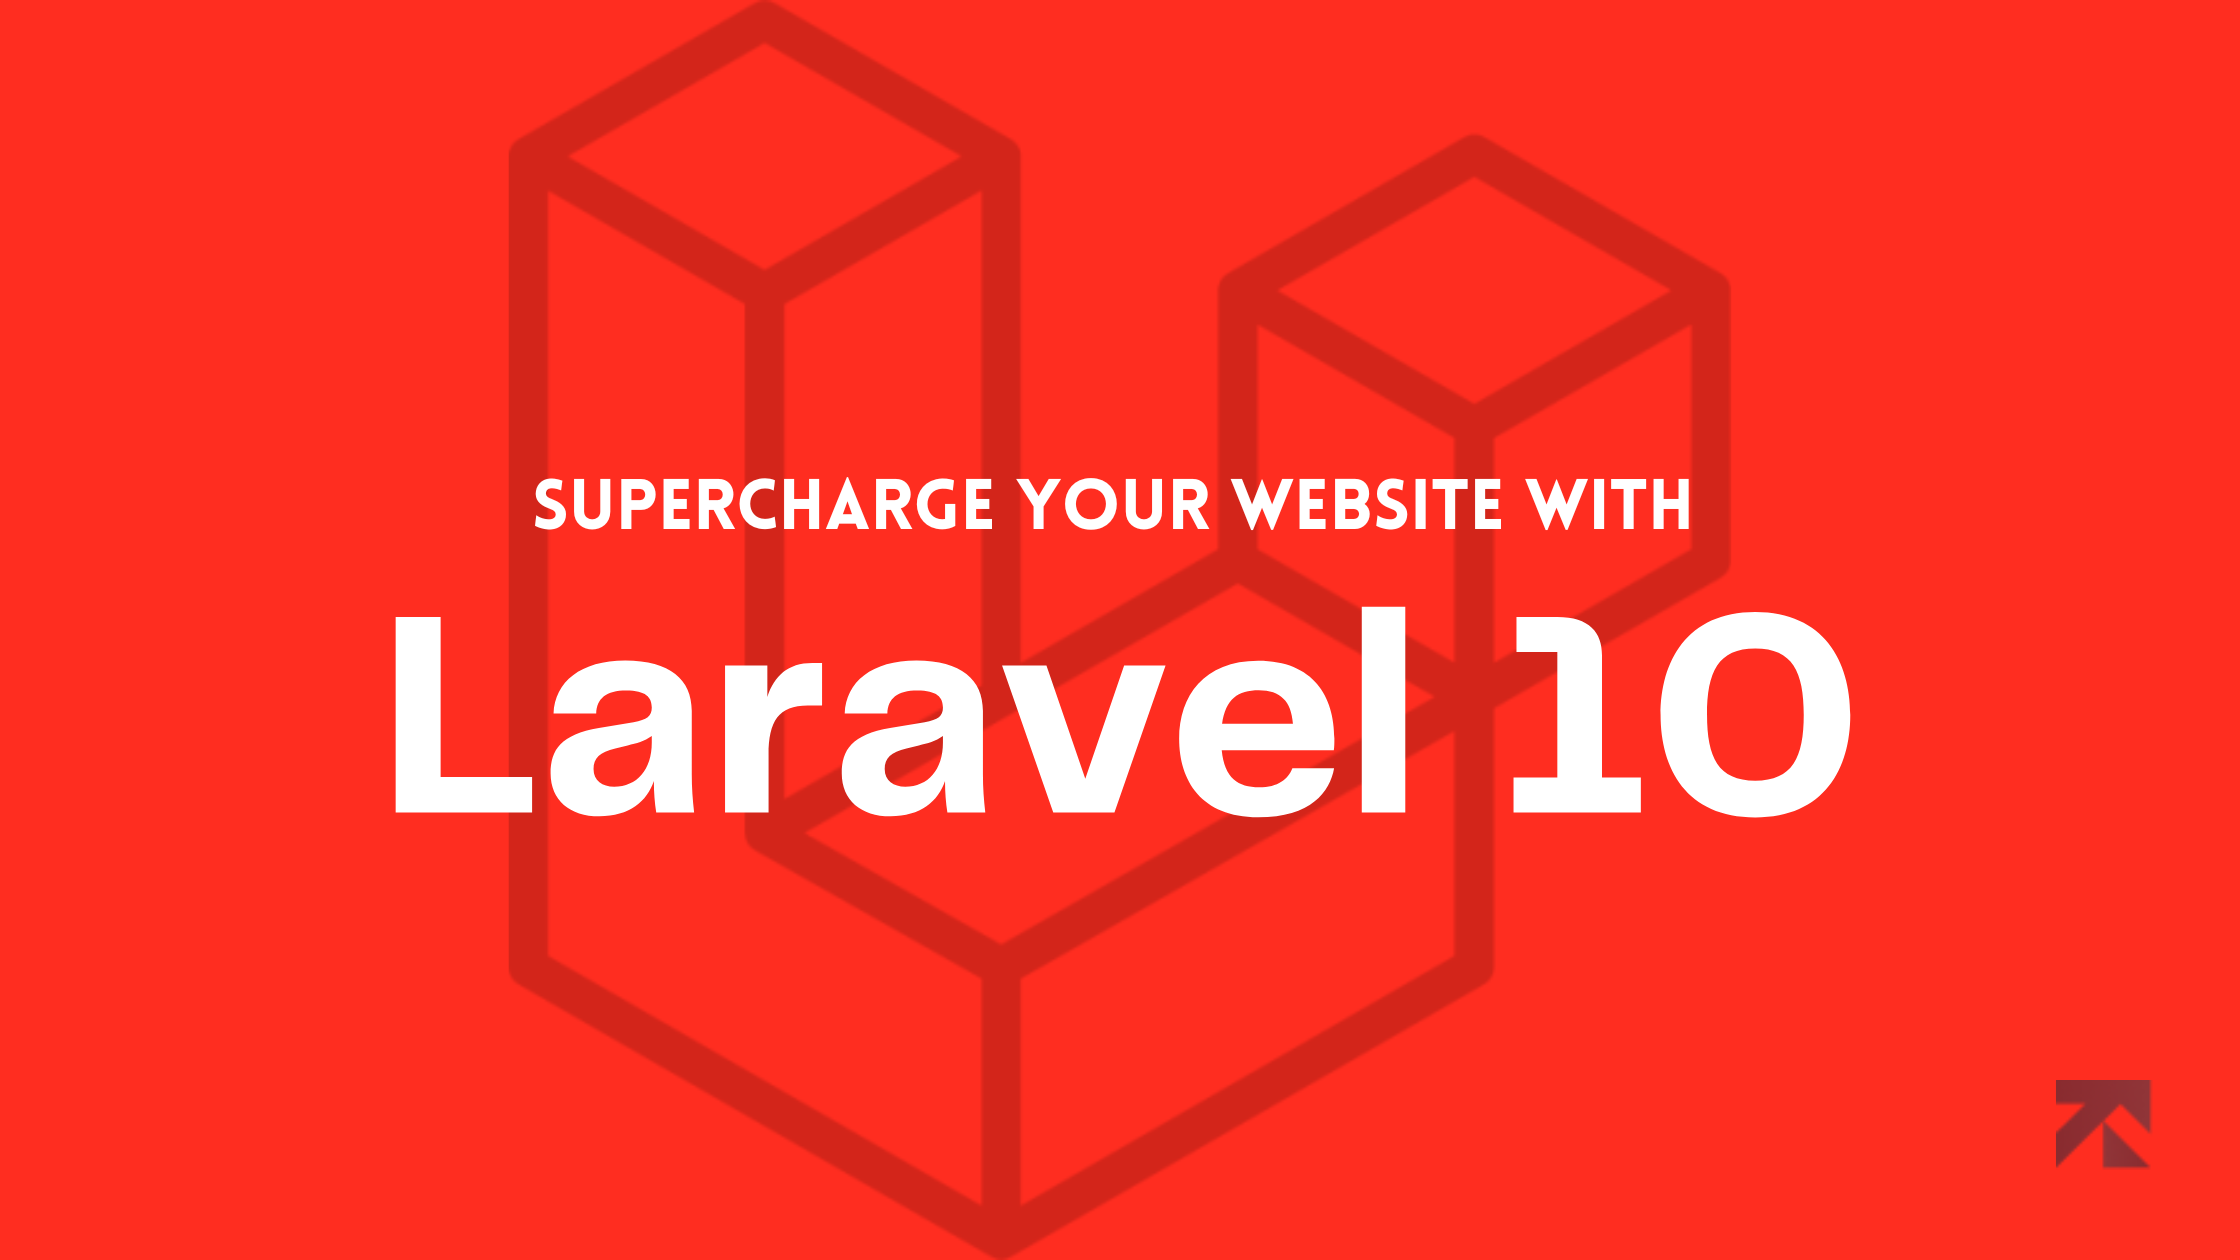 Supercharge your website with laravel 10